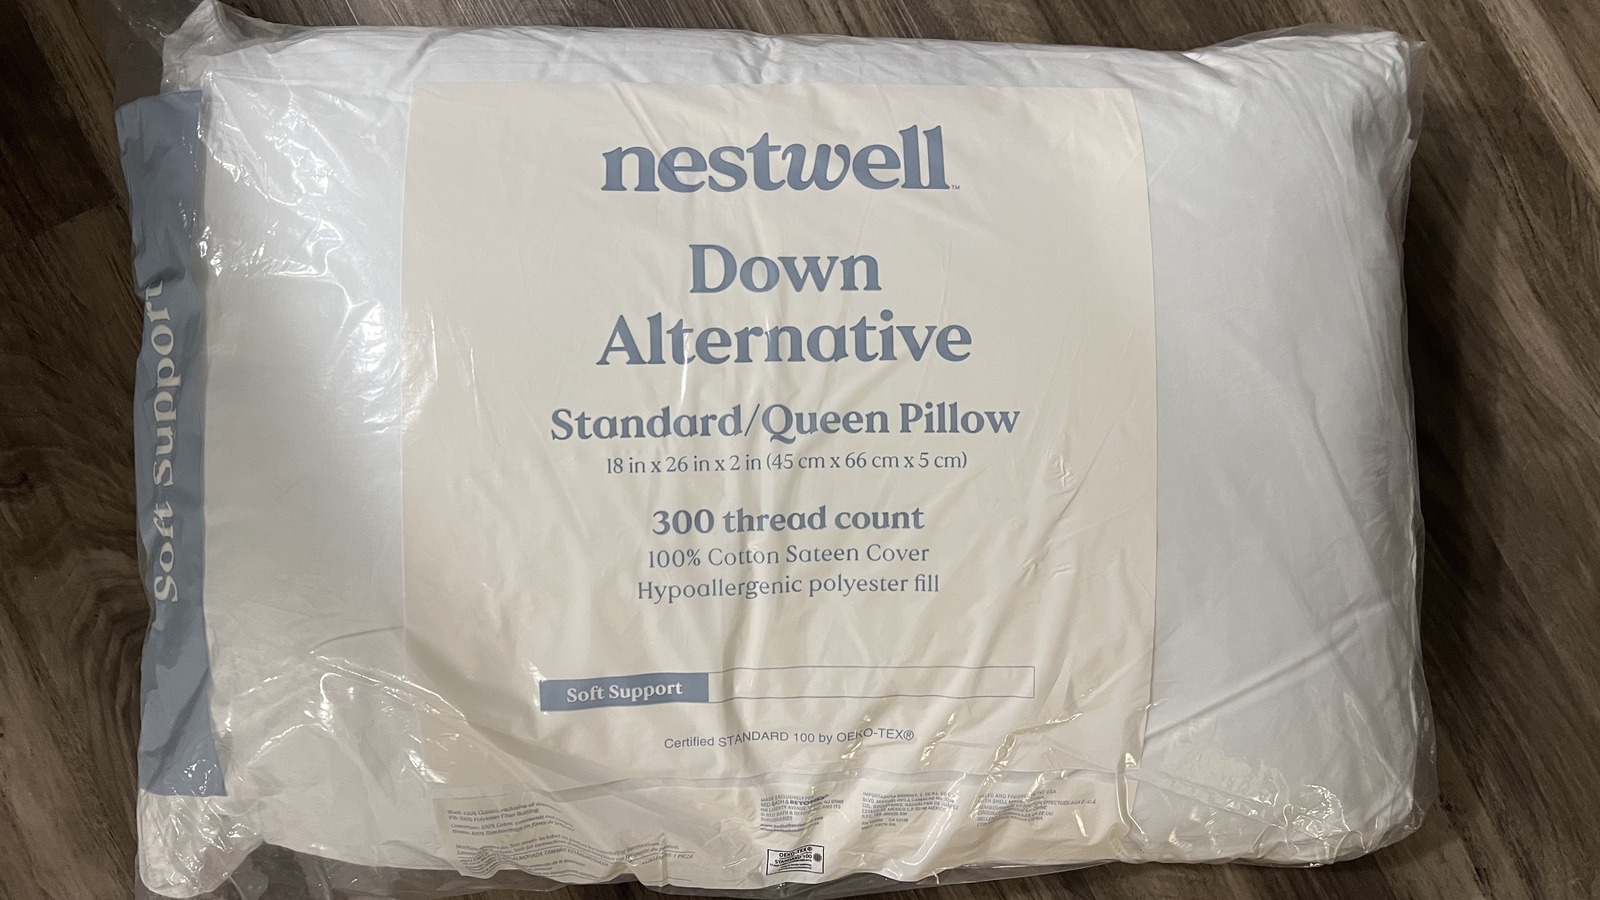 Nestwell, the First of Many Private Labels to Come From Bed Bath